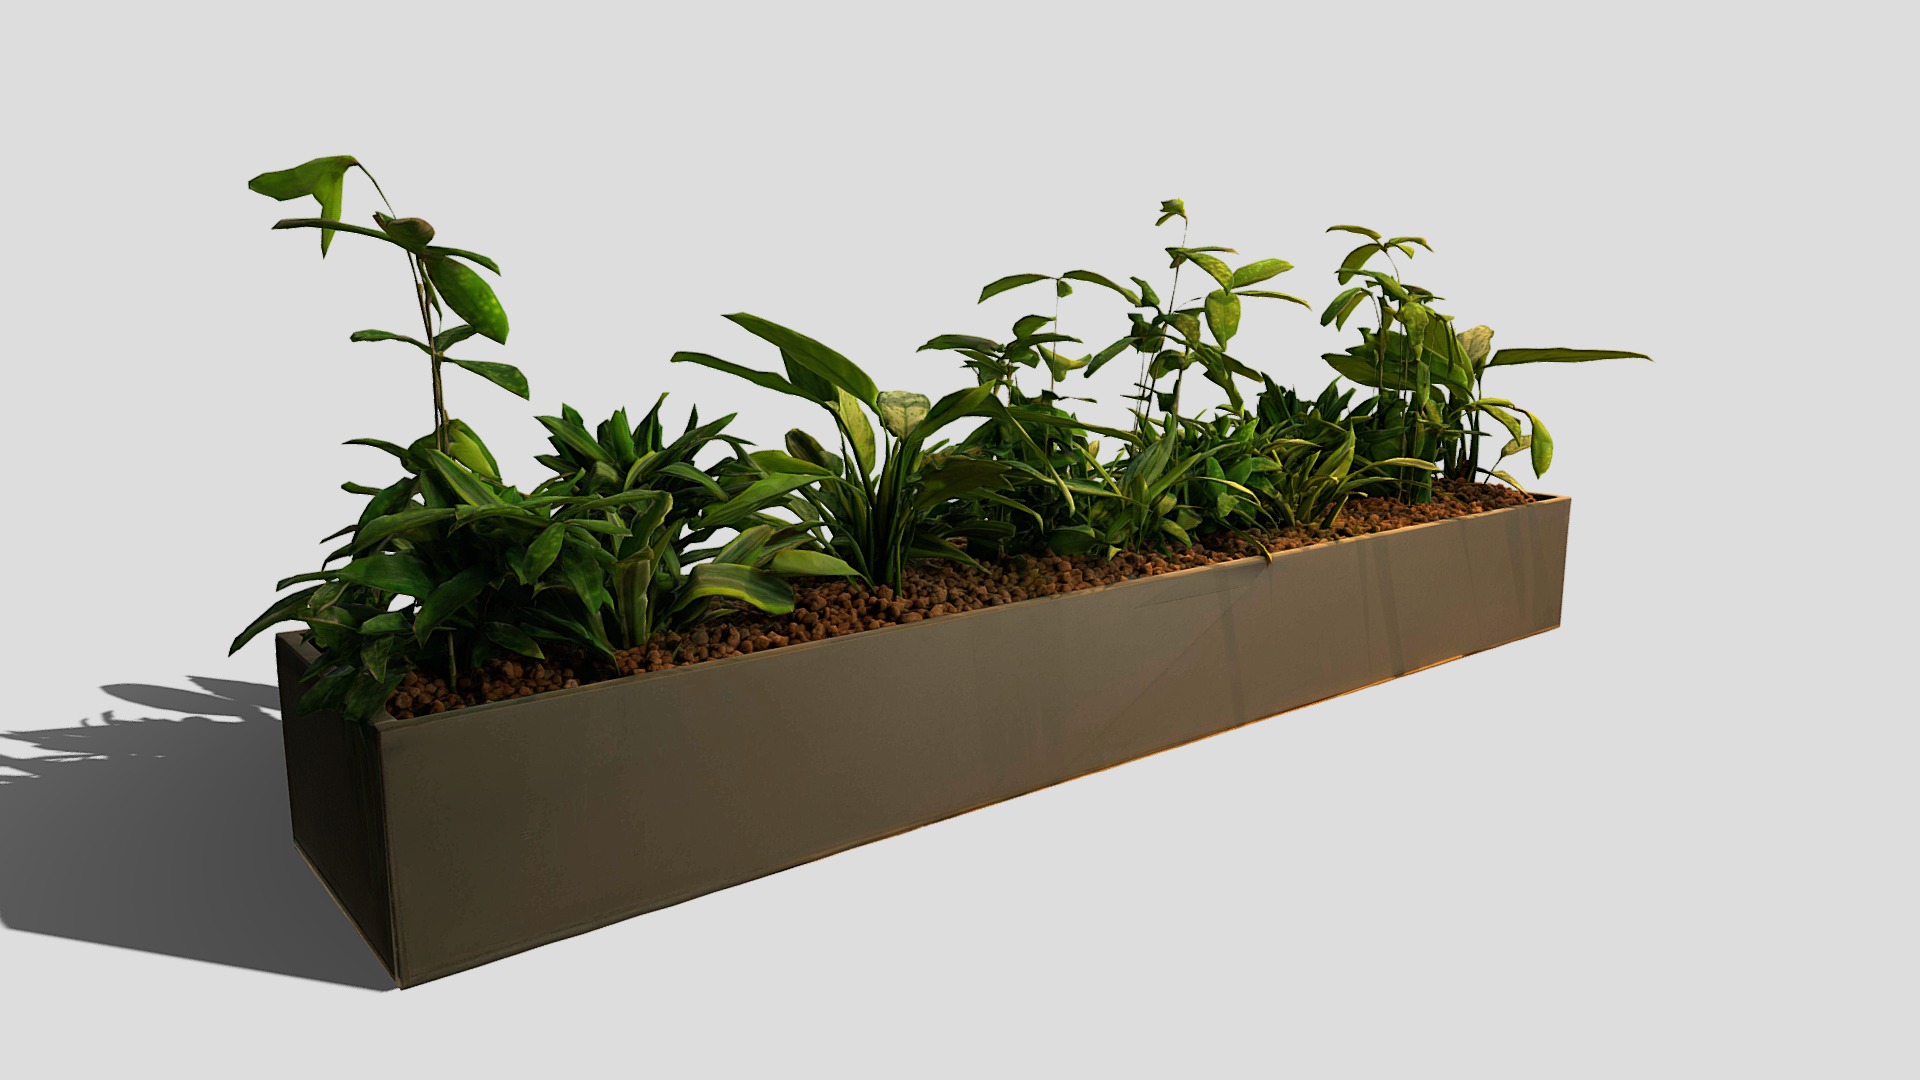 3D model Planter 1 - This is a 3D model of the Planter 1. The 3D model is about a planter with plants in it.